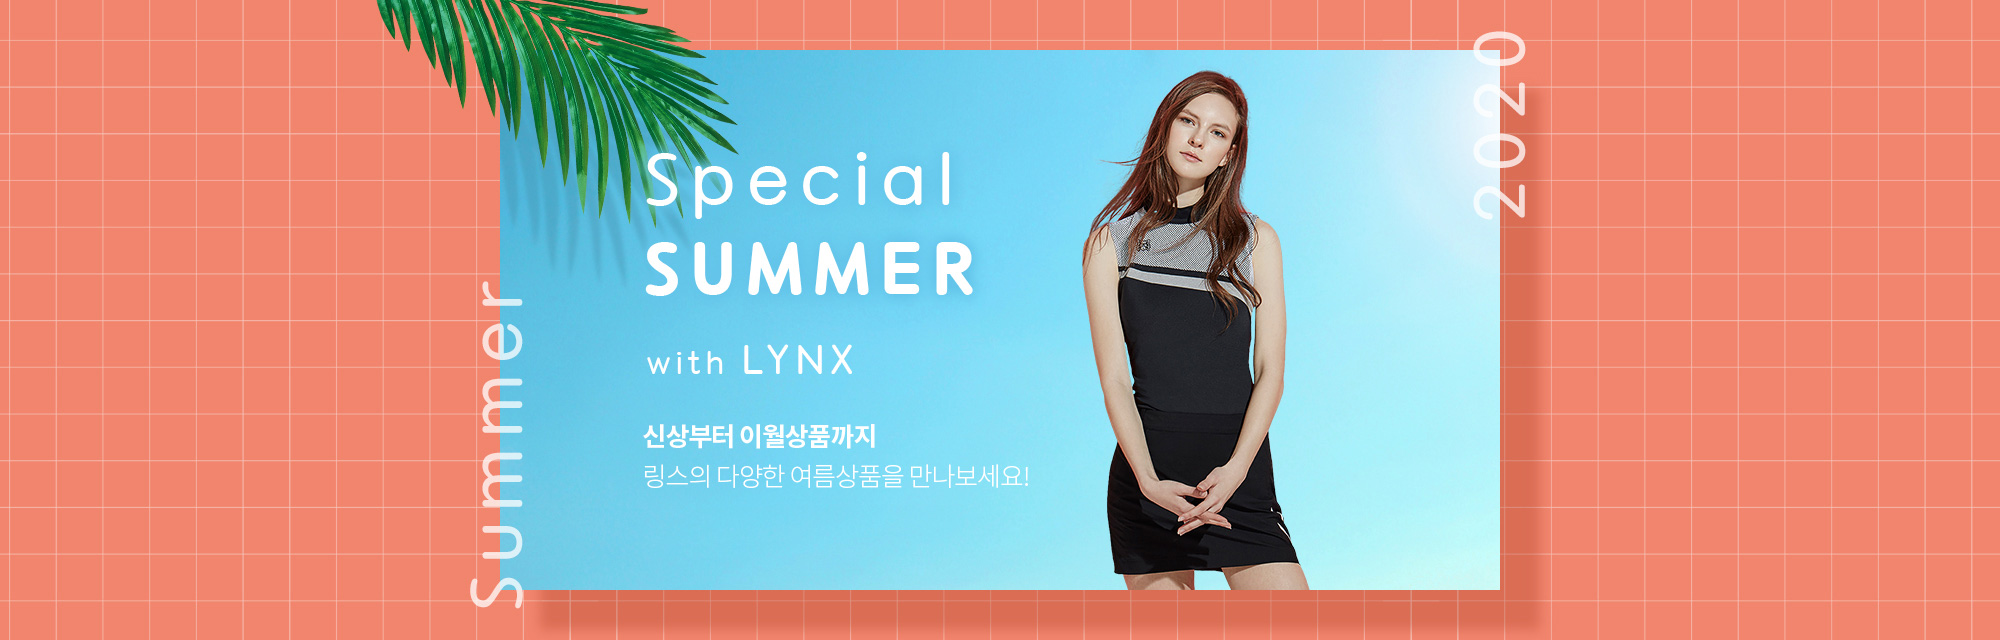 SPECIAL SUMMER WITH LYNX